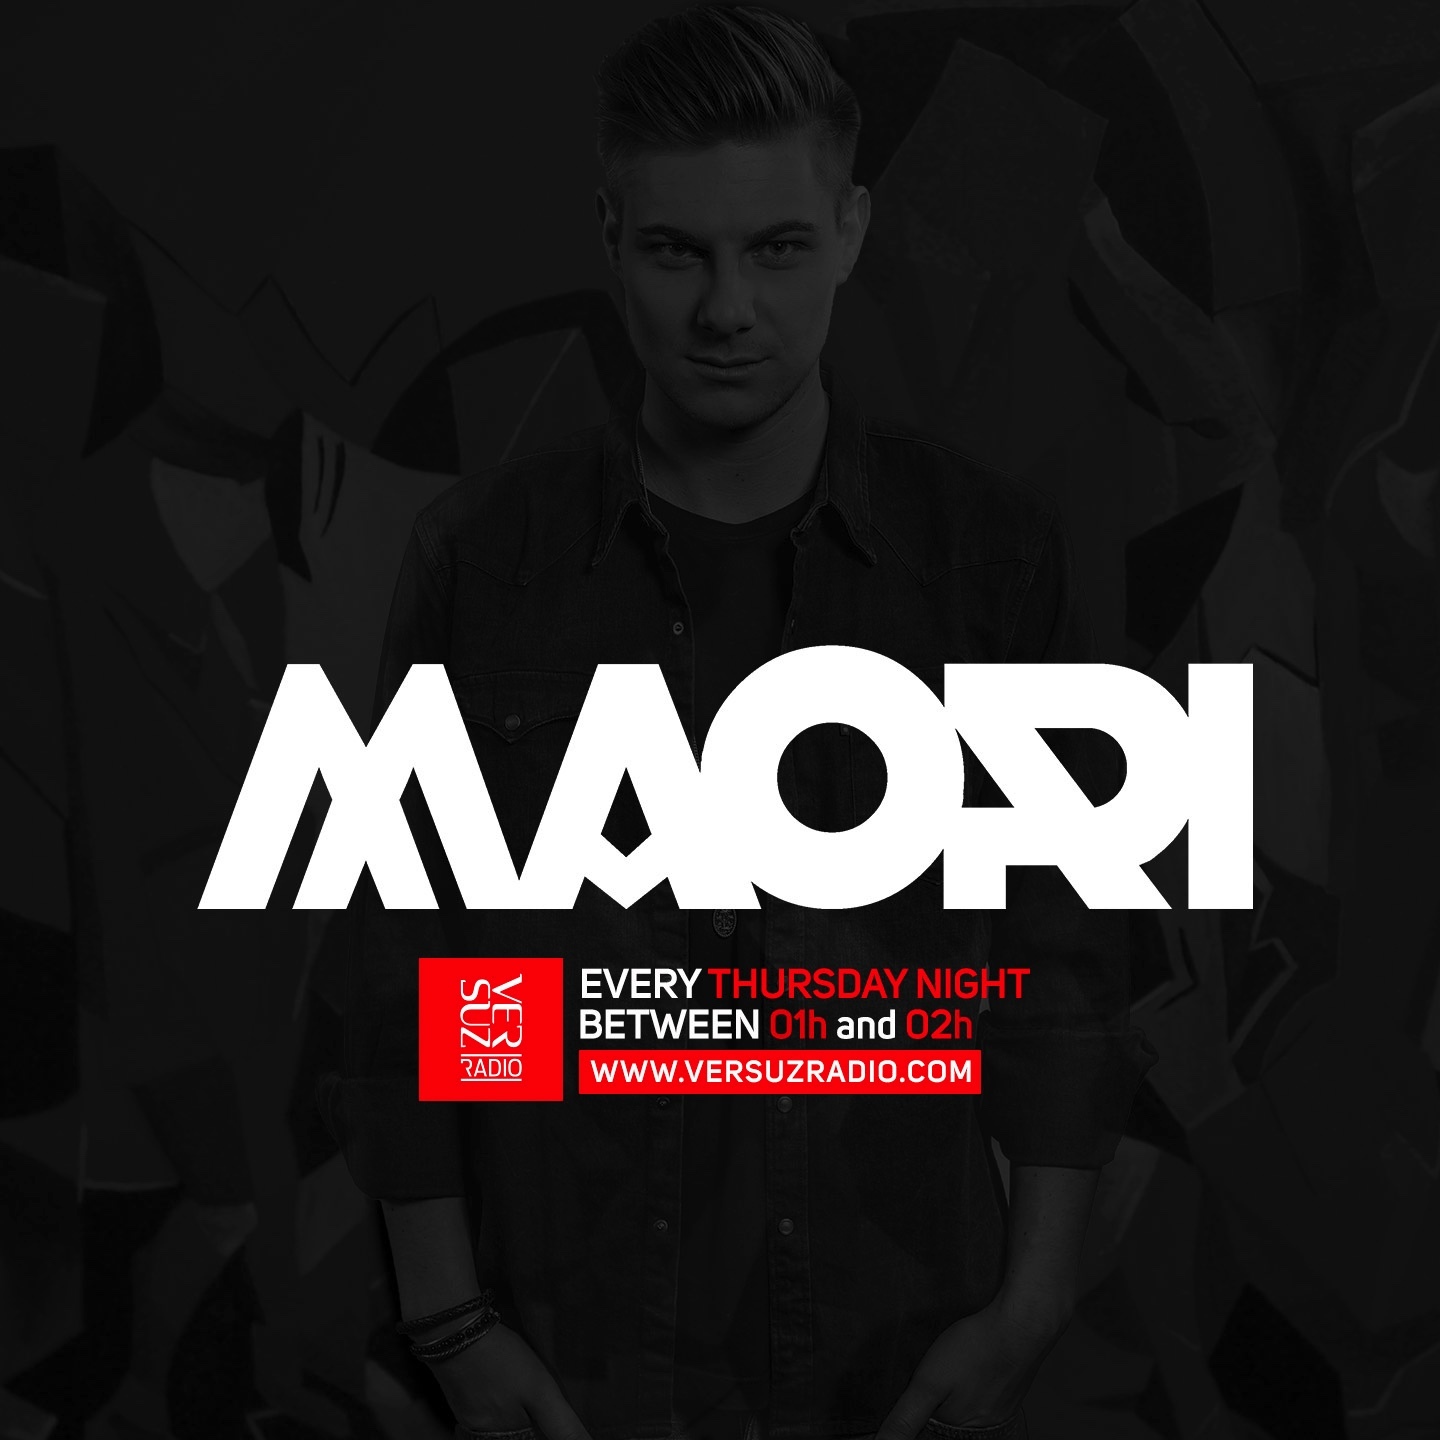 Clubhouse Radio by Maori - Episode #026